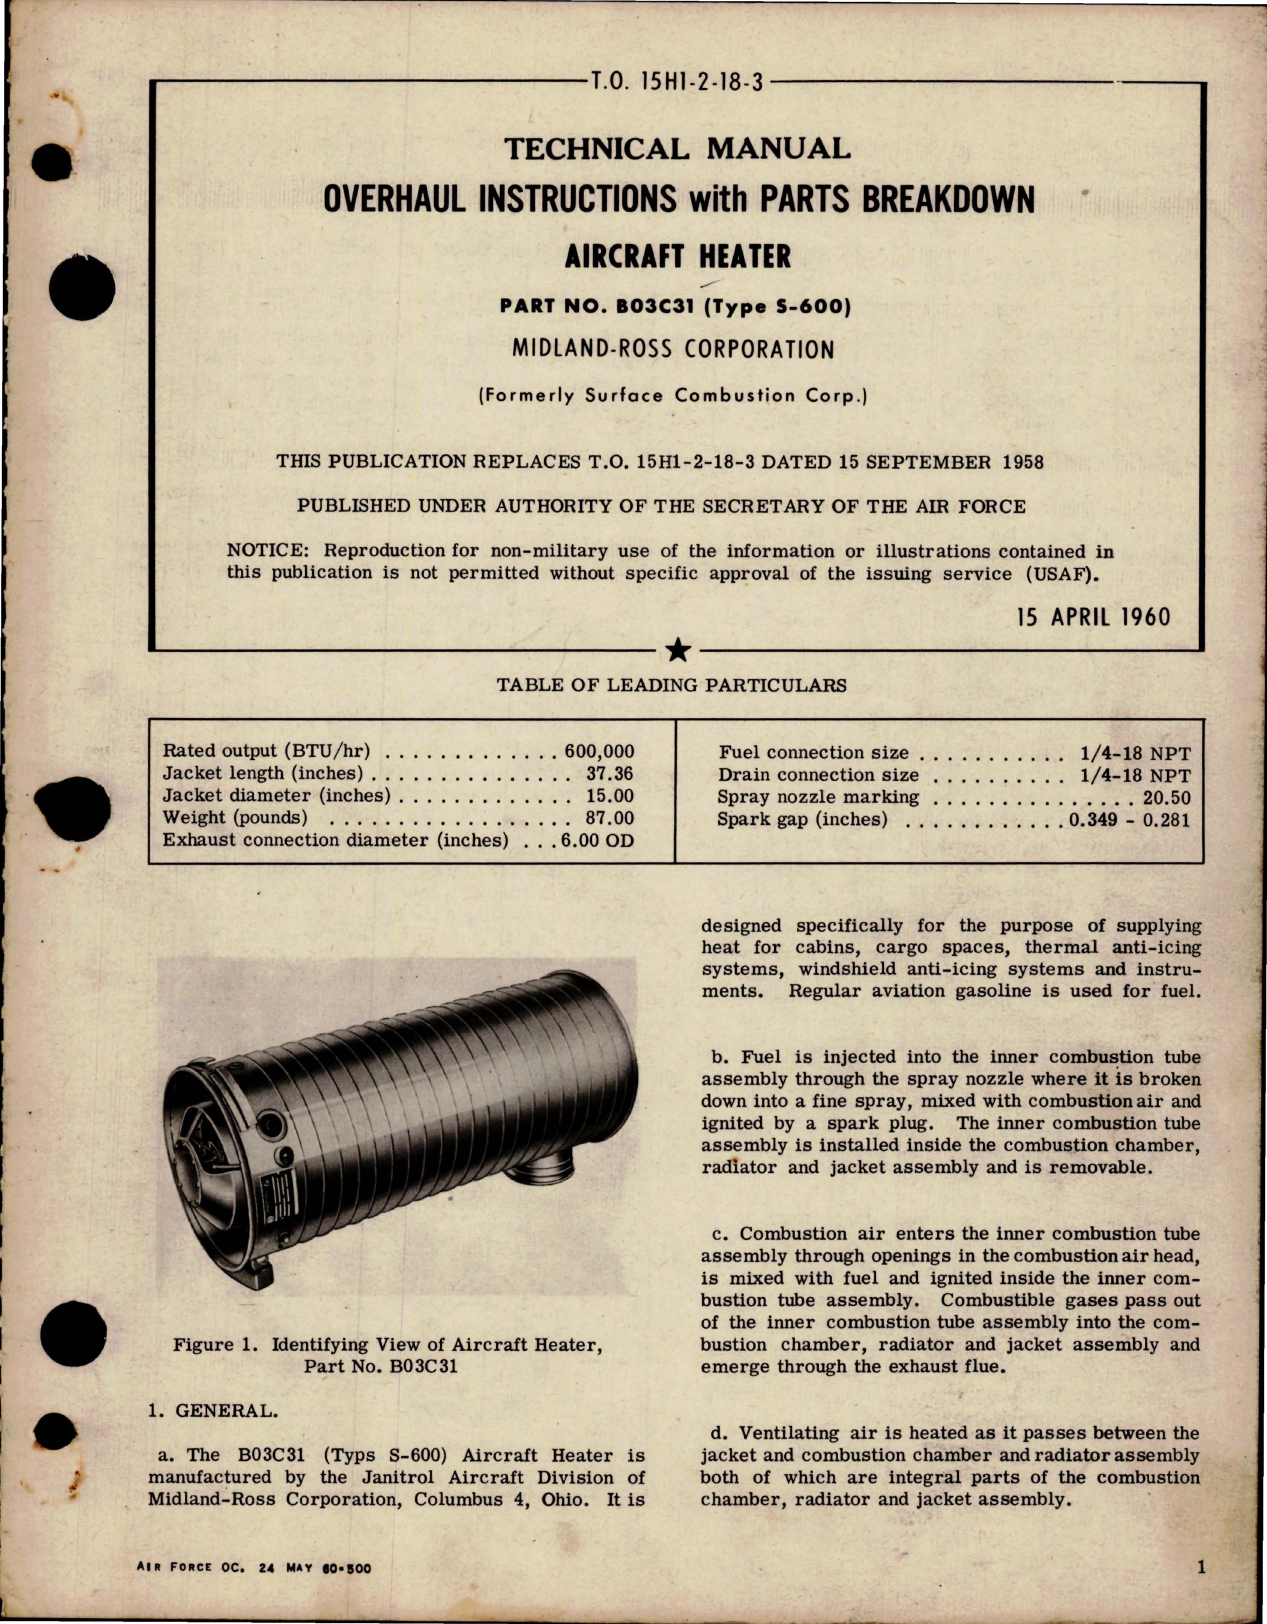 Sample page 1 from AirCorps Library document: Overhaul Instructions with Parts Breakdown for Aircraft Heater - Parts B03C31 - Type S-600 